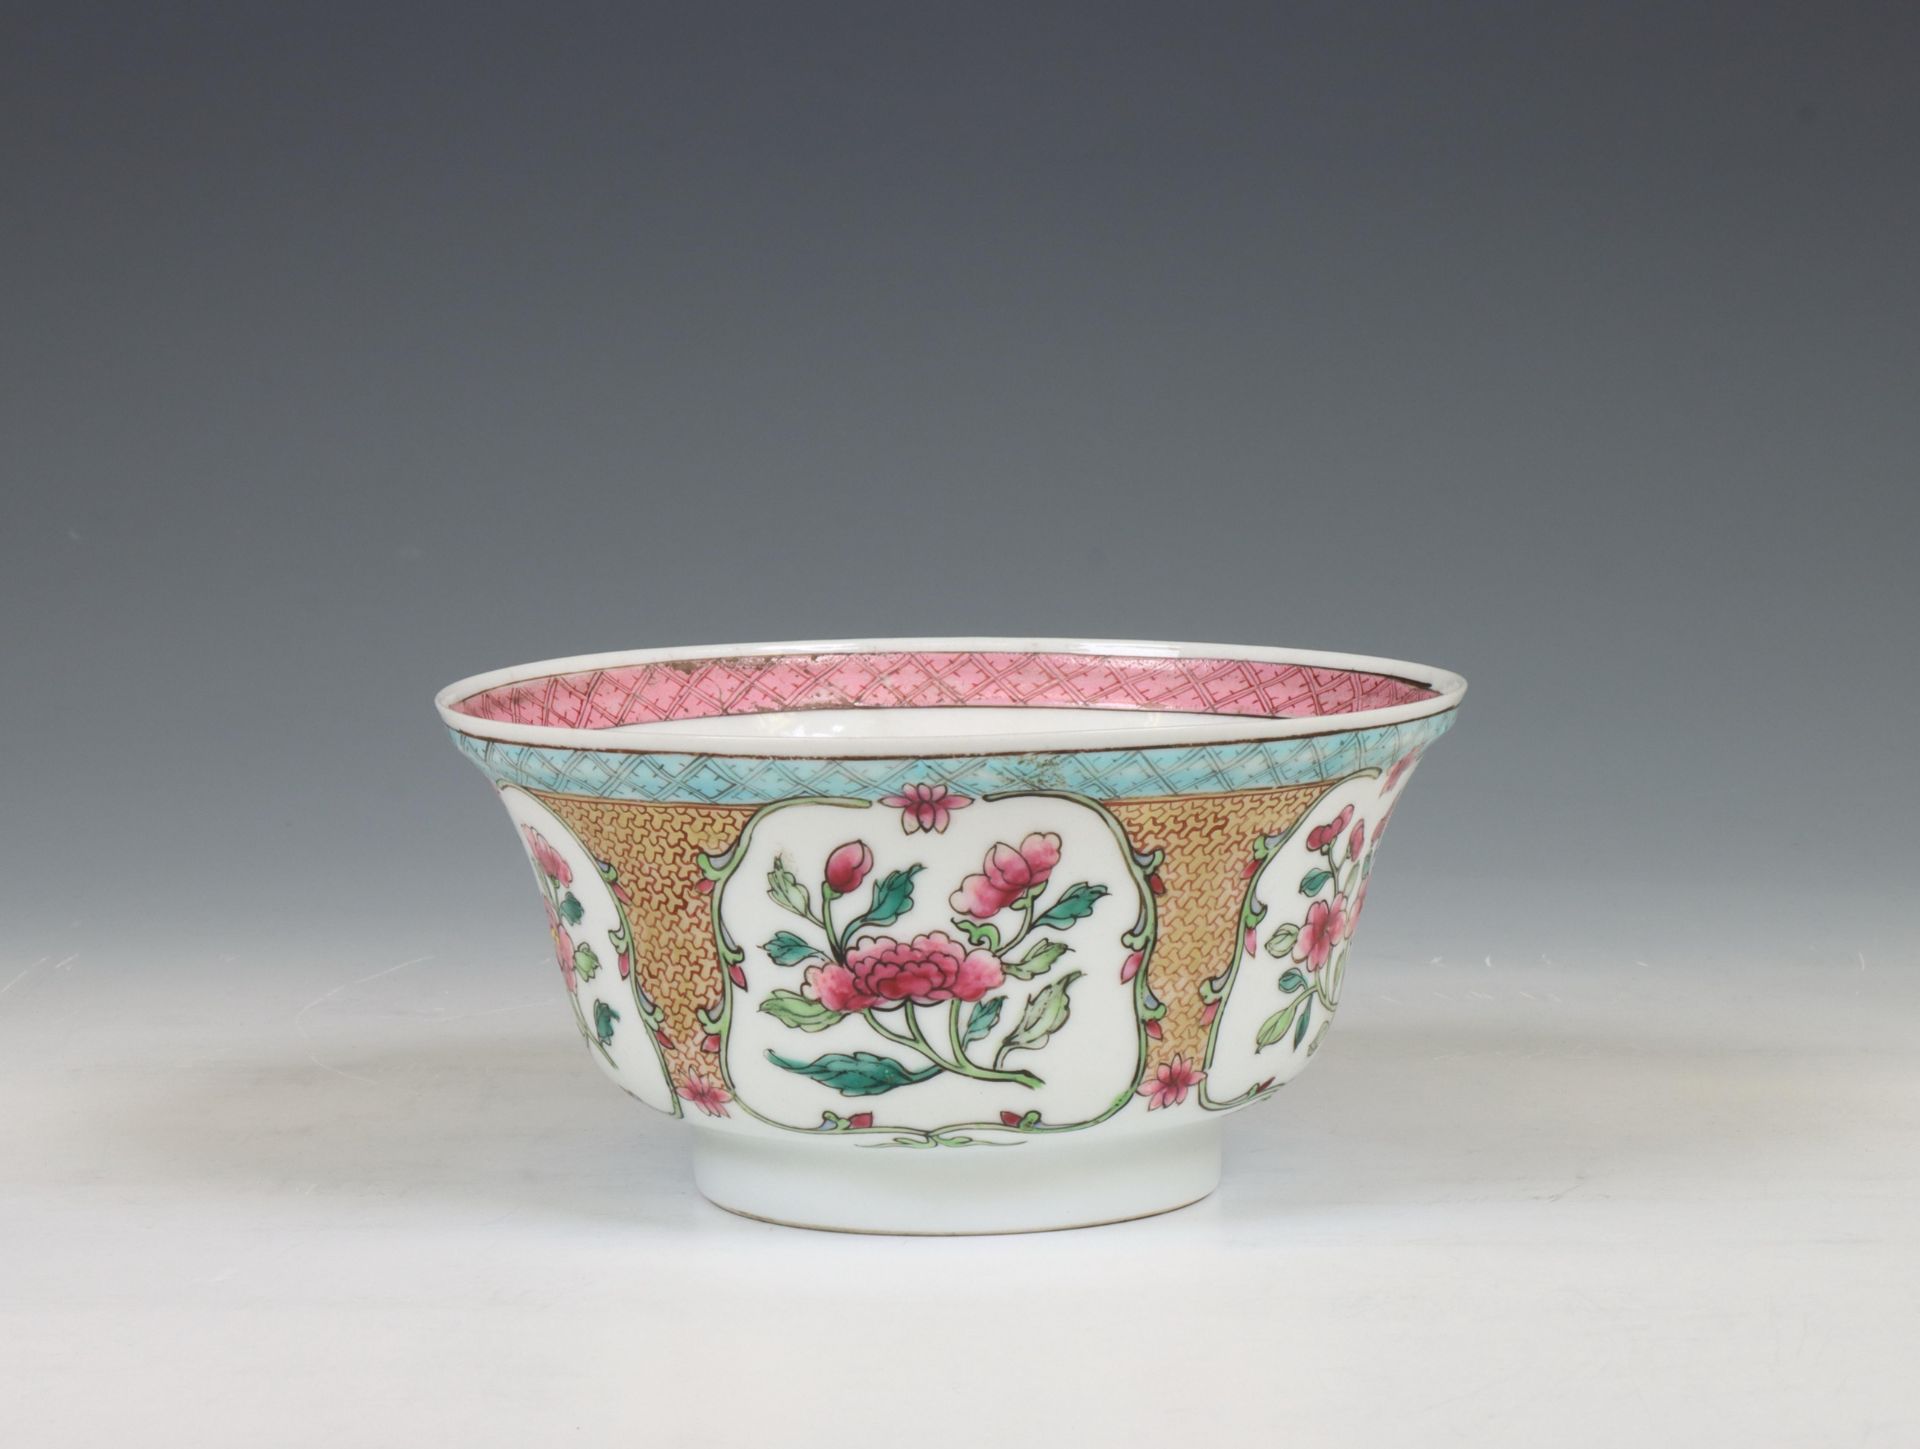 China, famille rose porcelain bowl, late Qing dynasty (1644-1912),